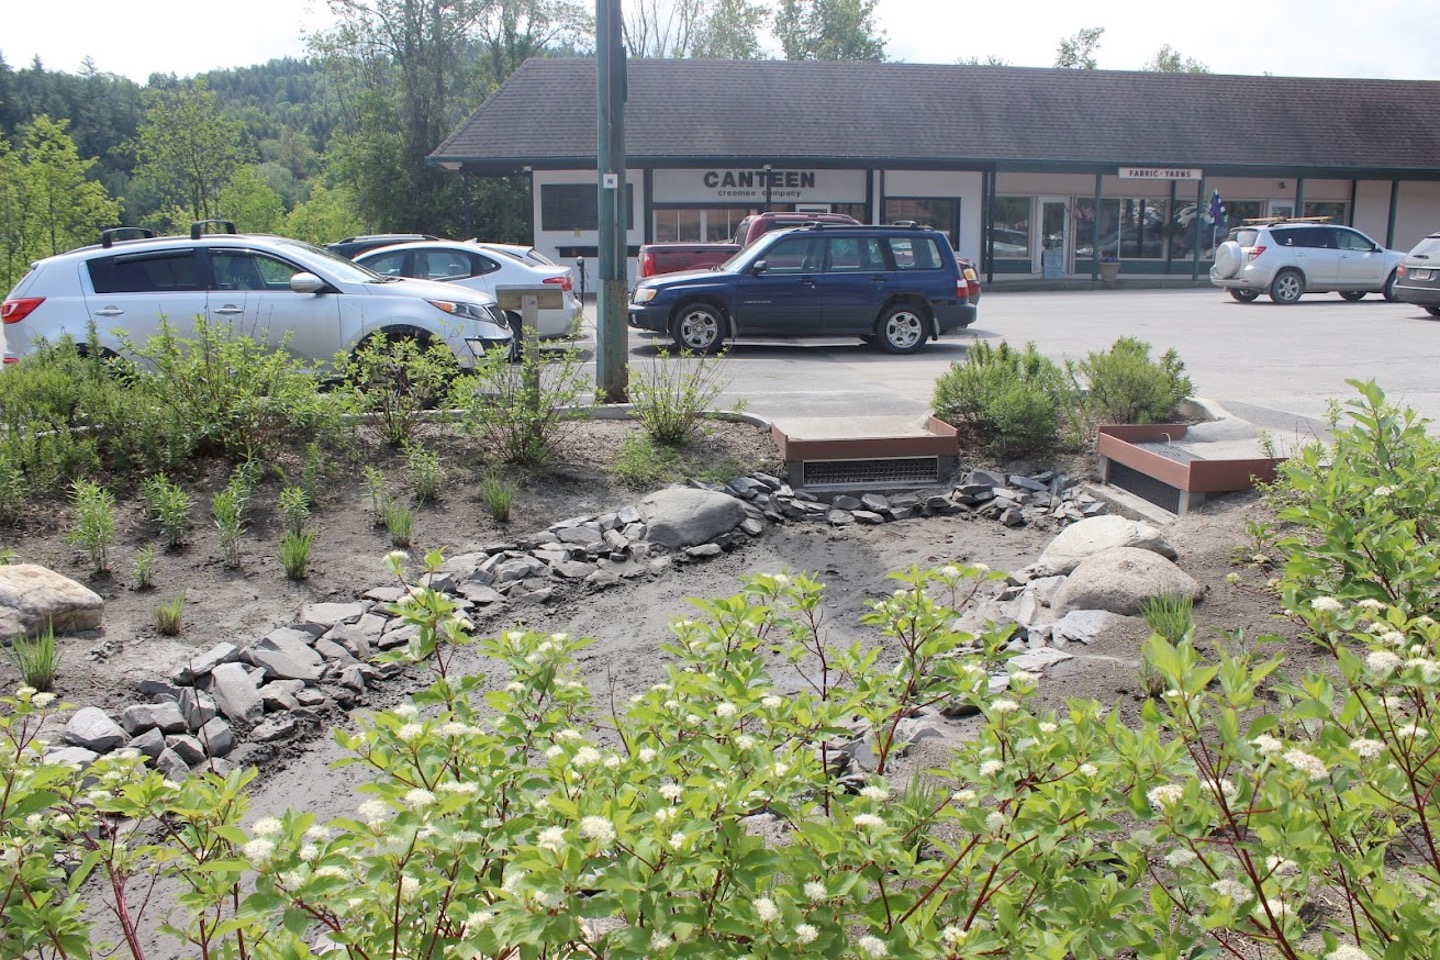 View of parking area in Waitsfield VT with plantings and run off cachement basin.